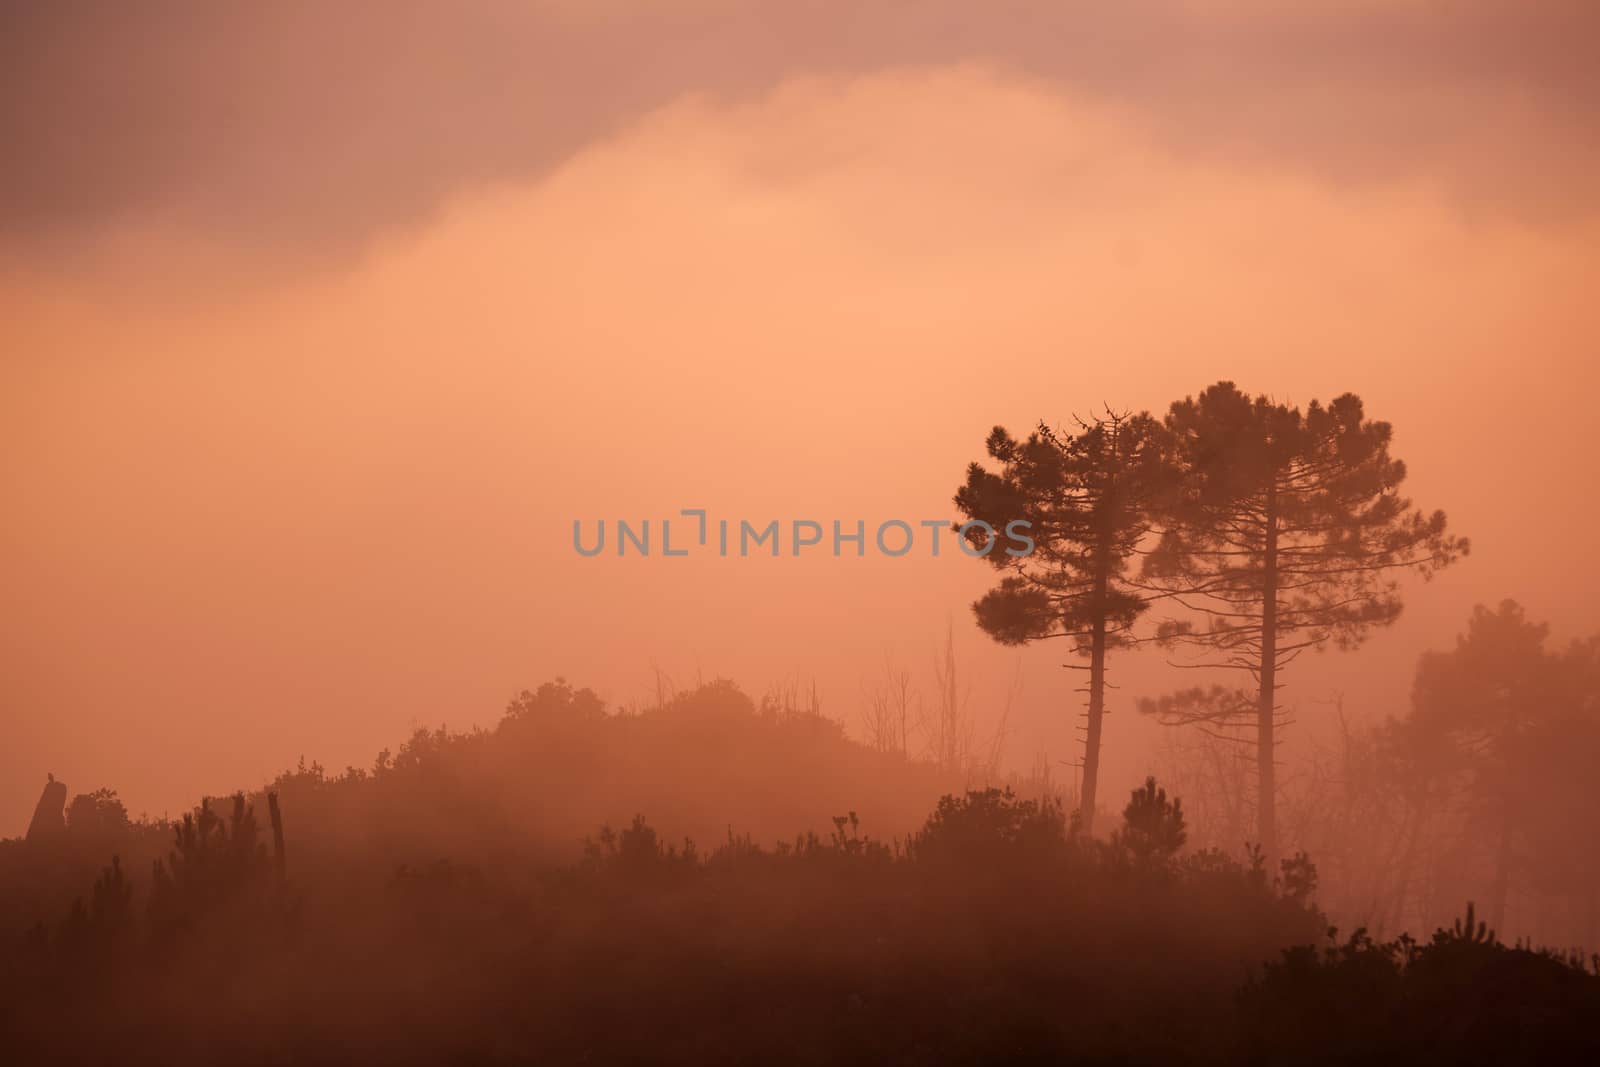 The fog at sunset by fotografiche.eu